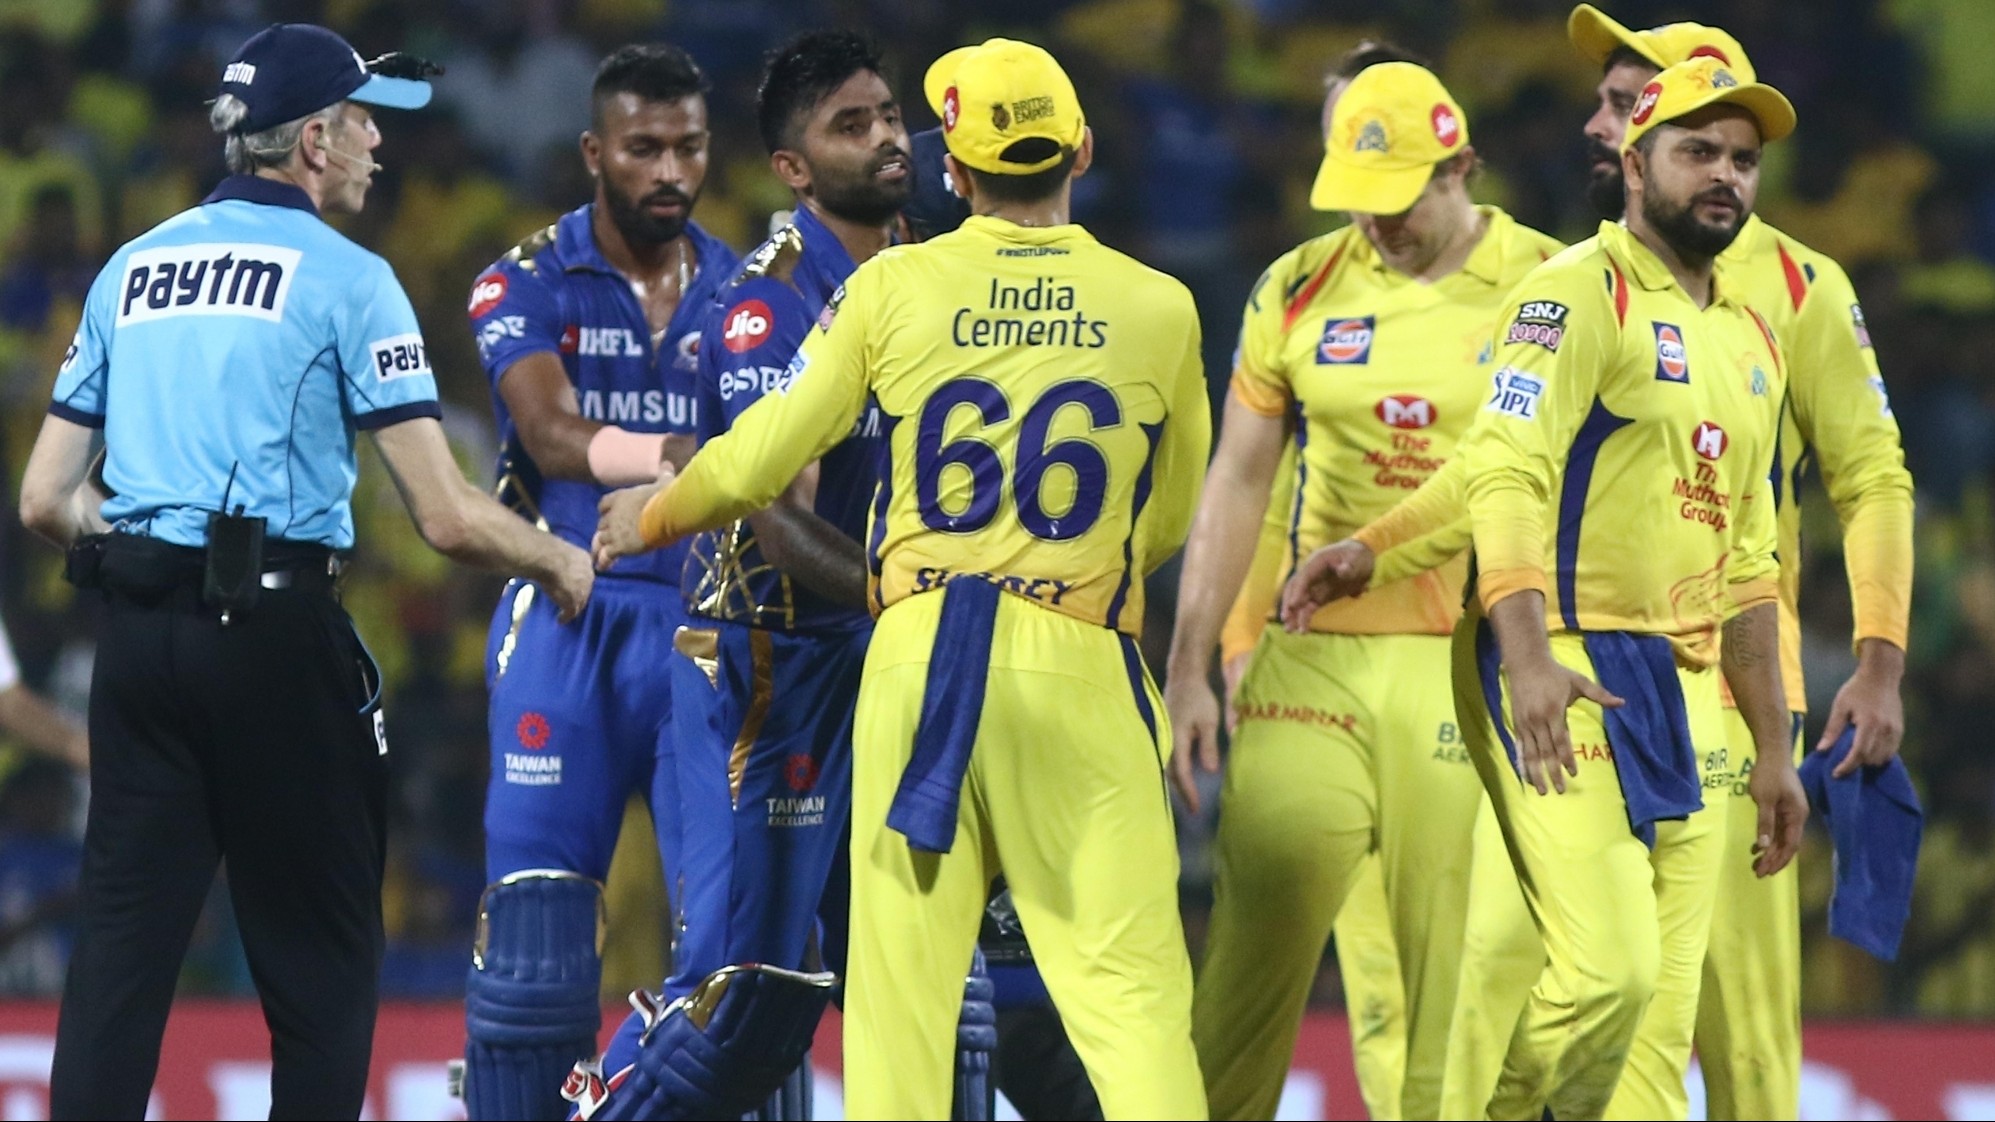 IPL 2020: Squad strength of franchises to be discussed at Governing Council meeting